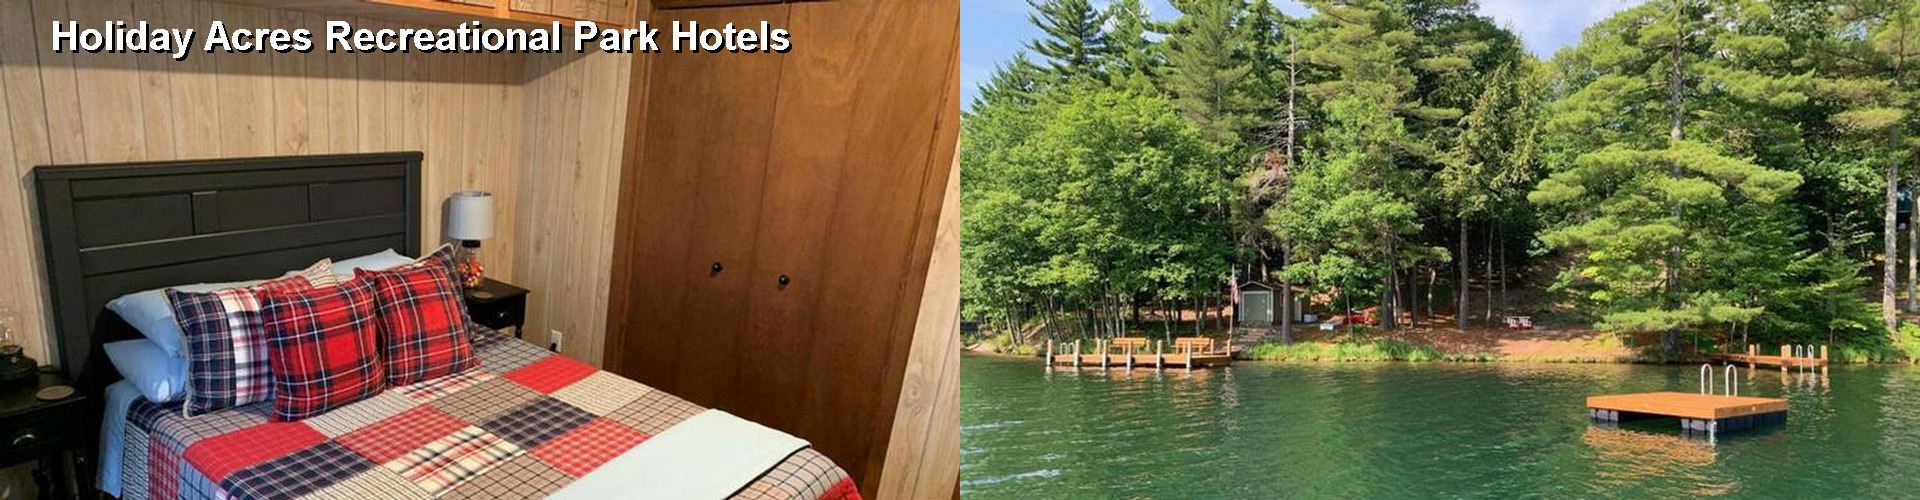 5 Best Hotels near Holiday Acres Recreational Park